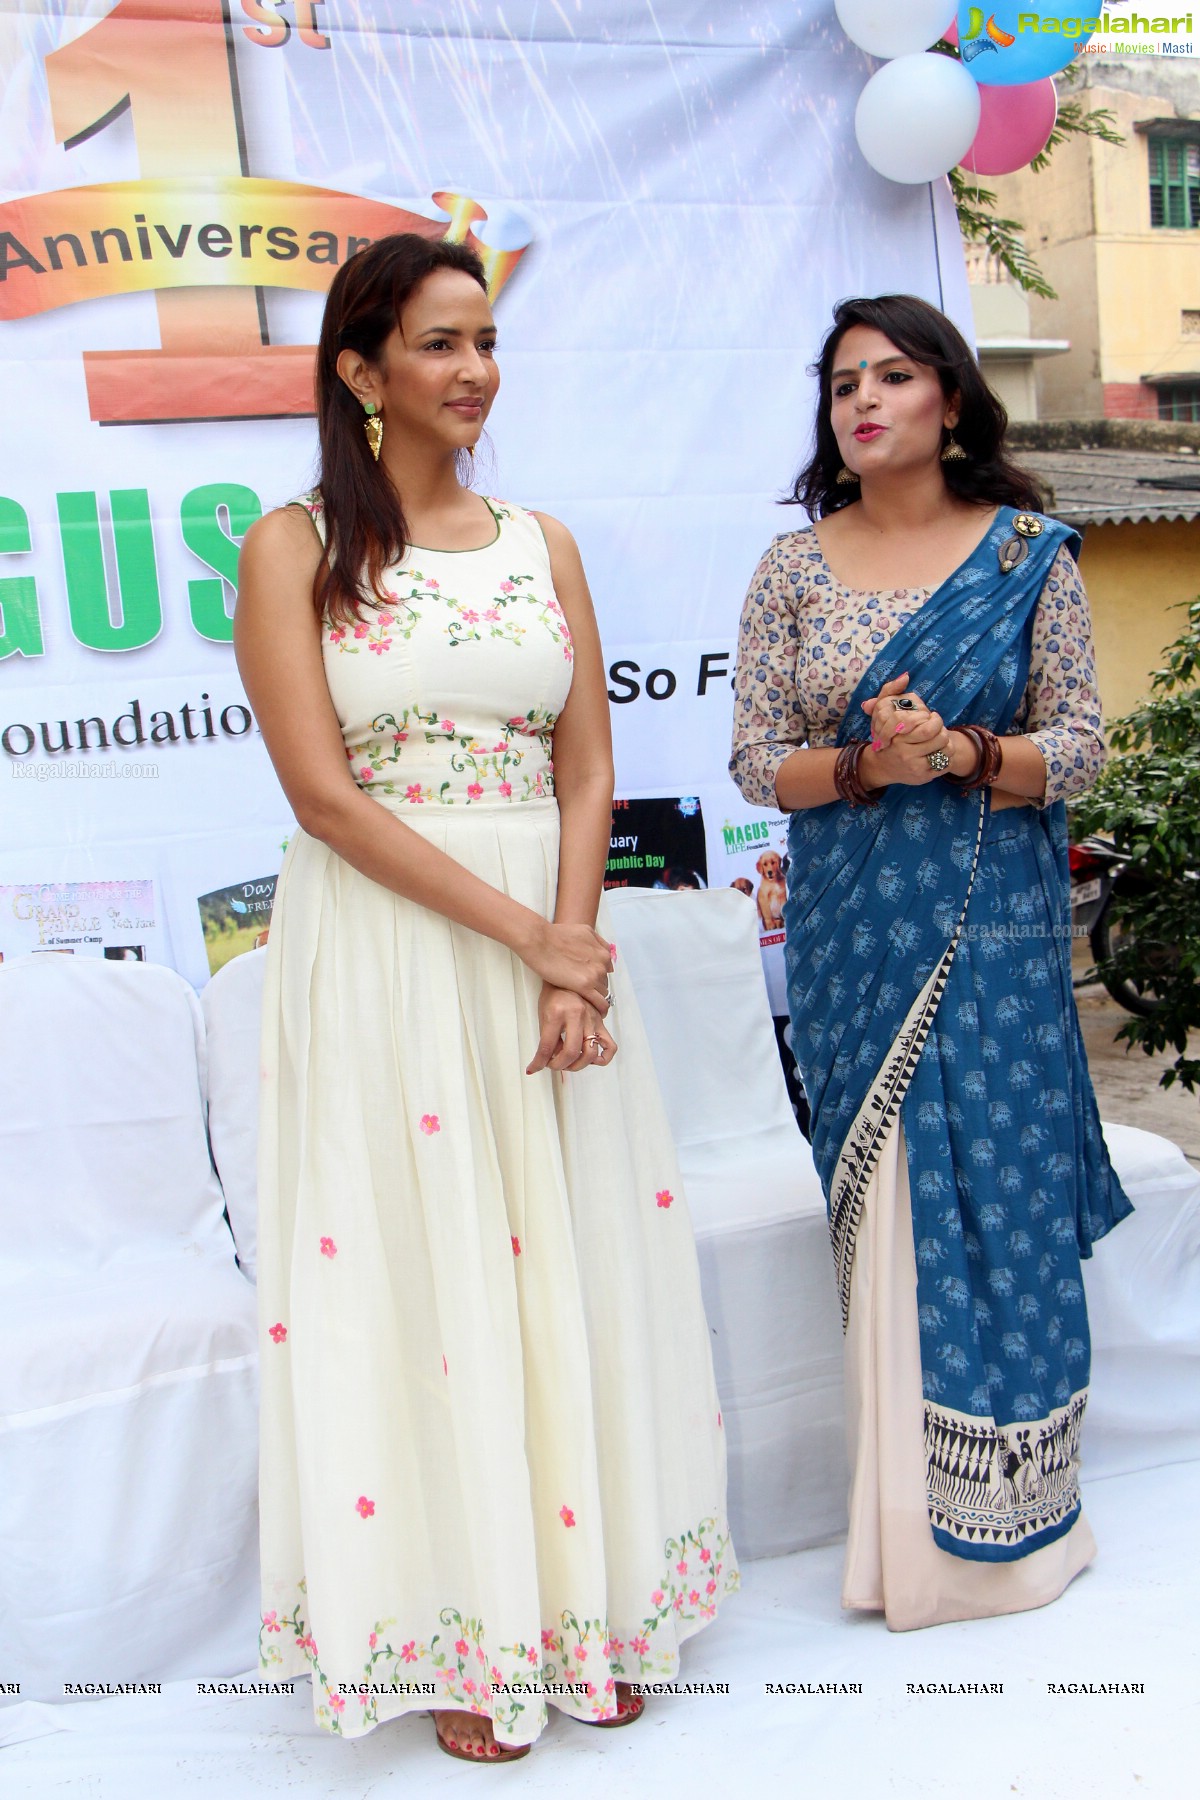 Magus Life Foundation 1st Anniversary Celebrations, Hyderabad